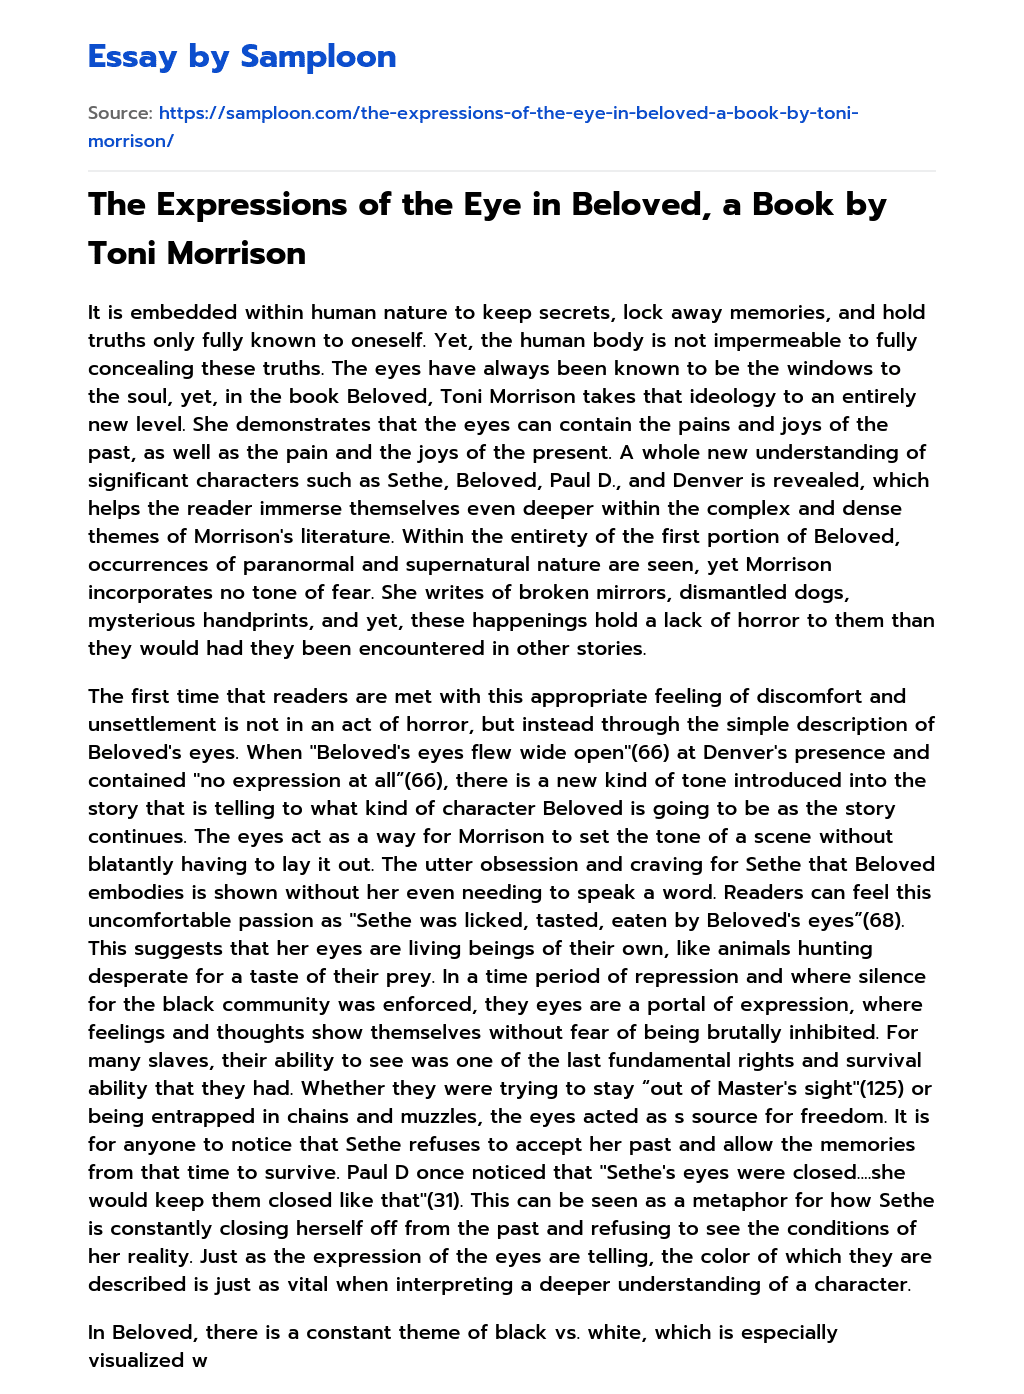 The Expressions of the Eye in Beloved, a Book by Toni Morrison essay